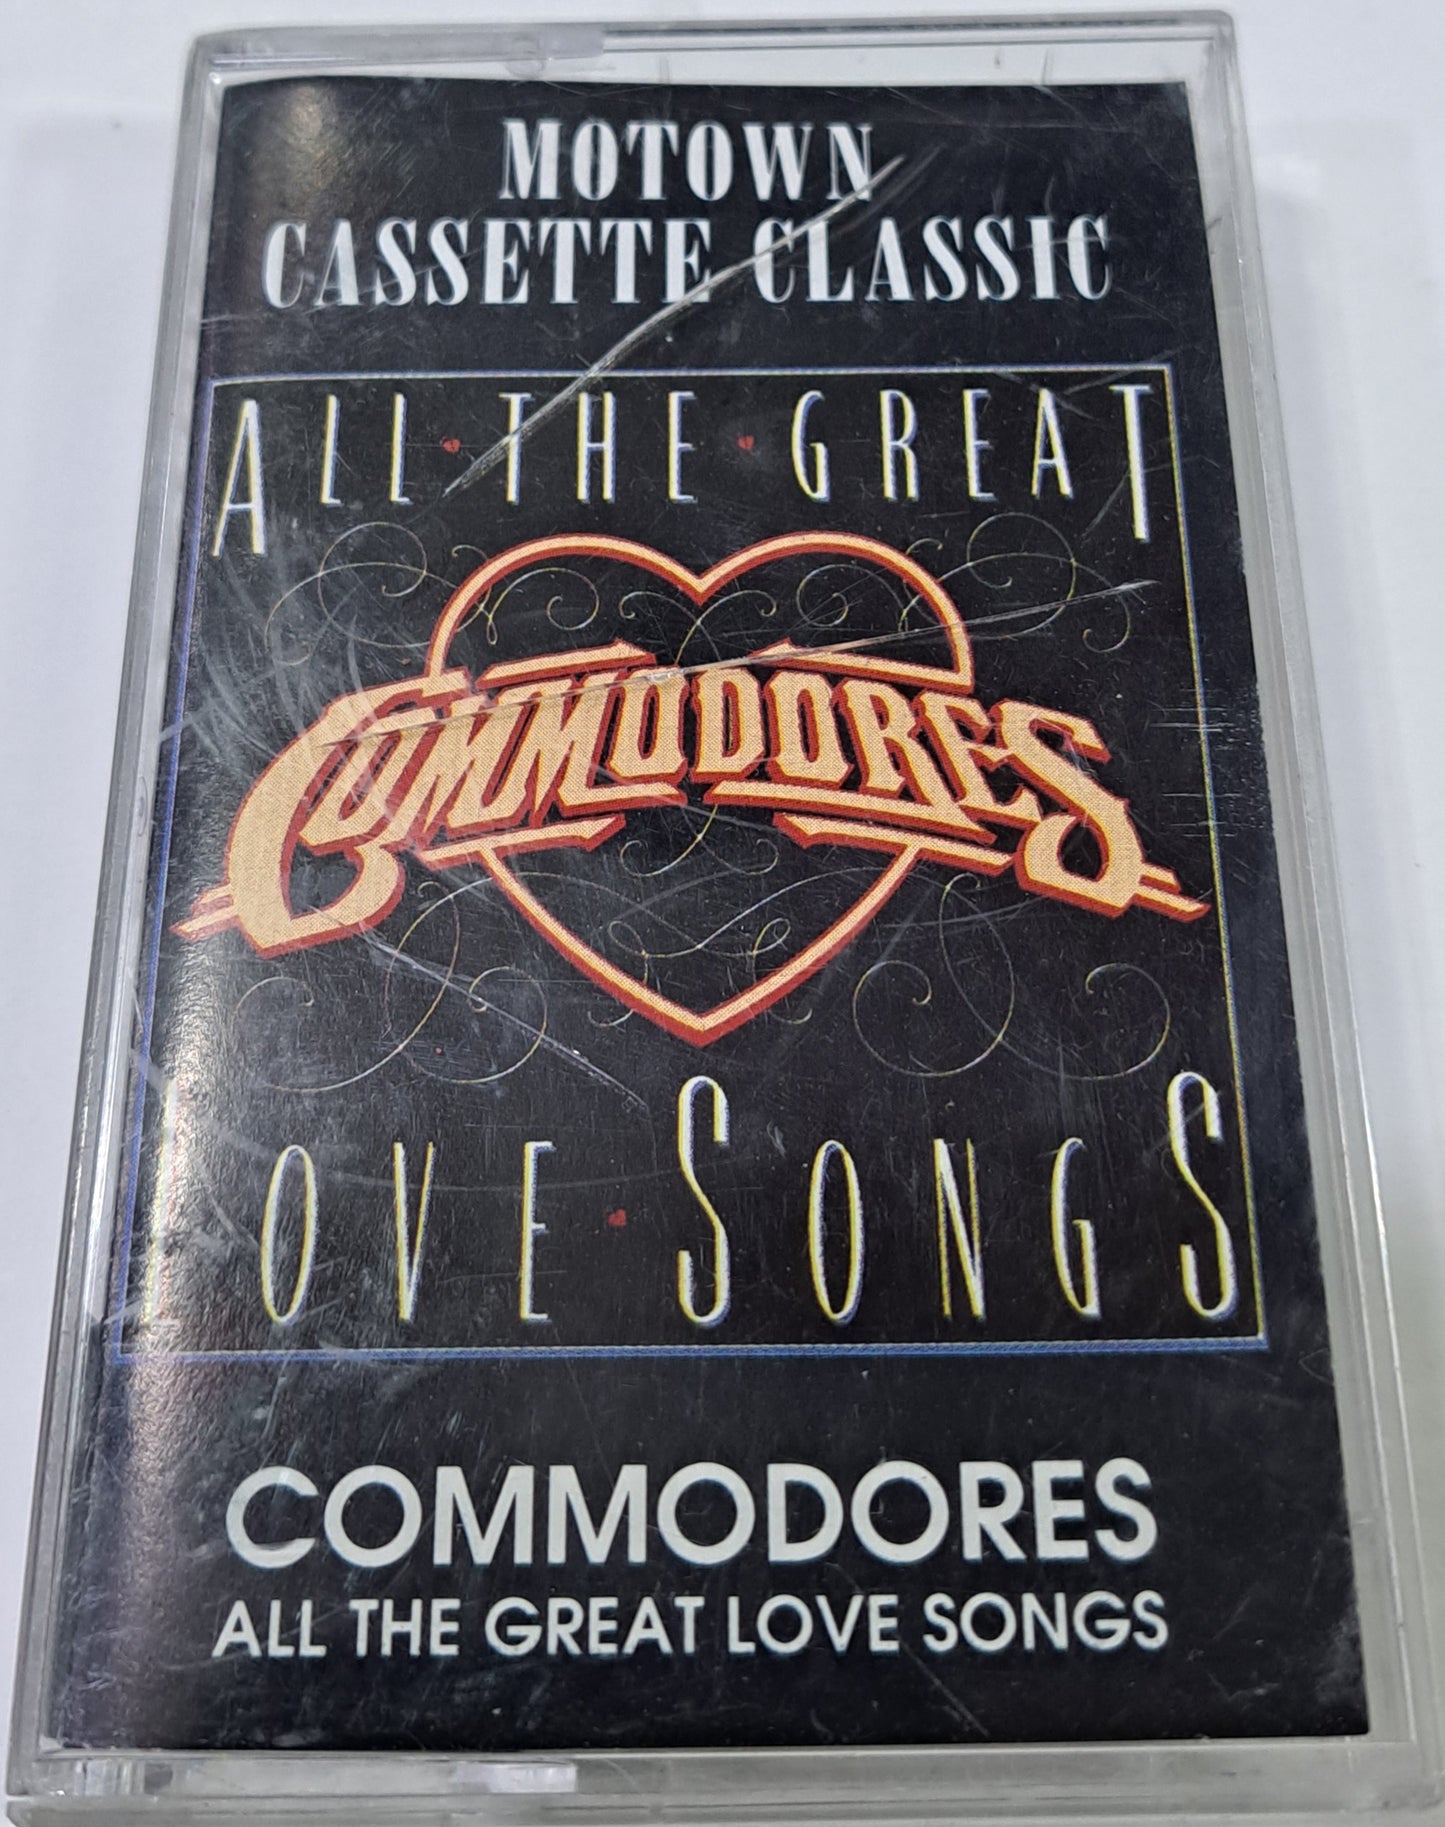 COMMODORES - ALL THE GREAT LOVE SONGS CASSETTE